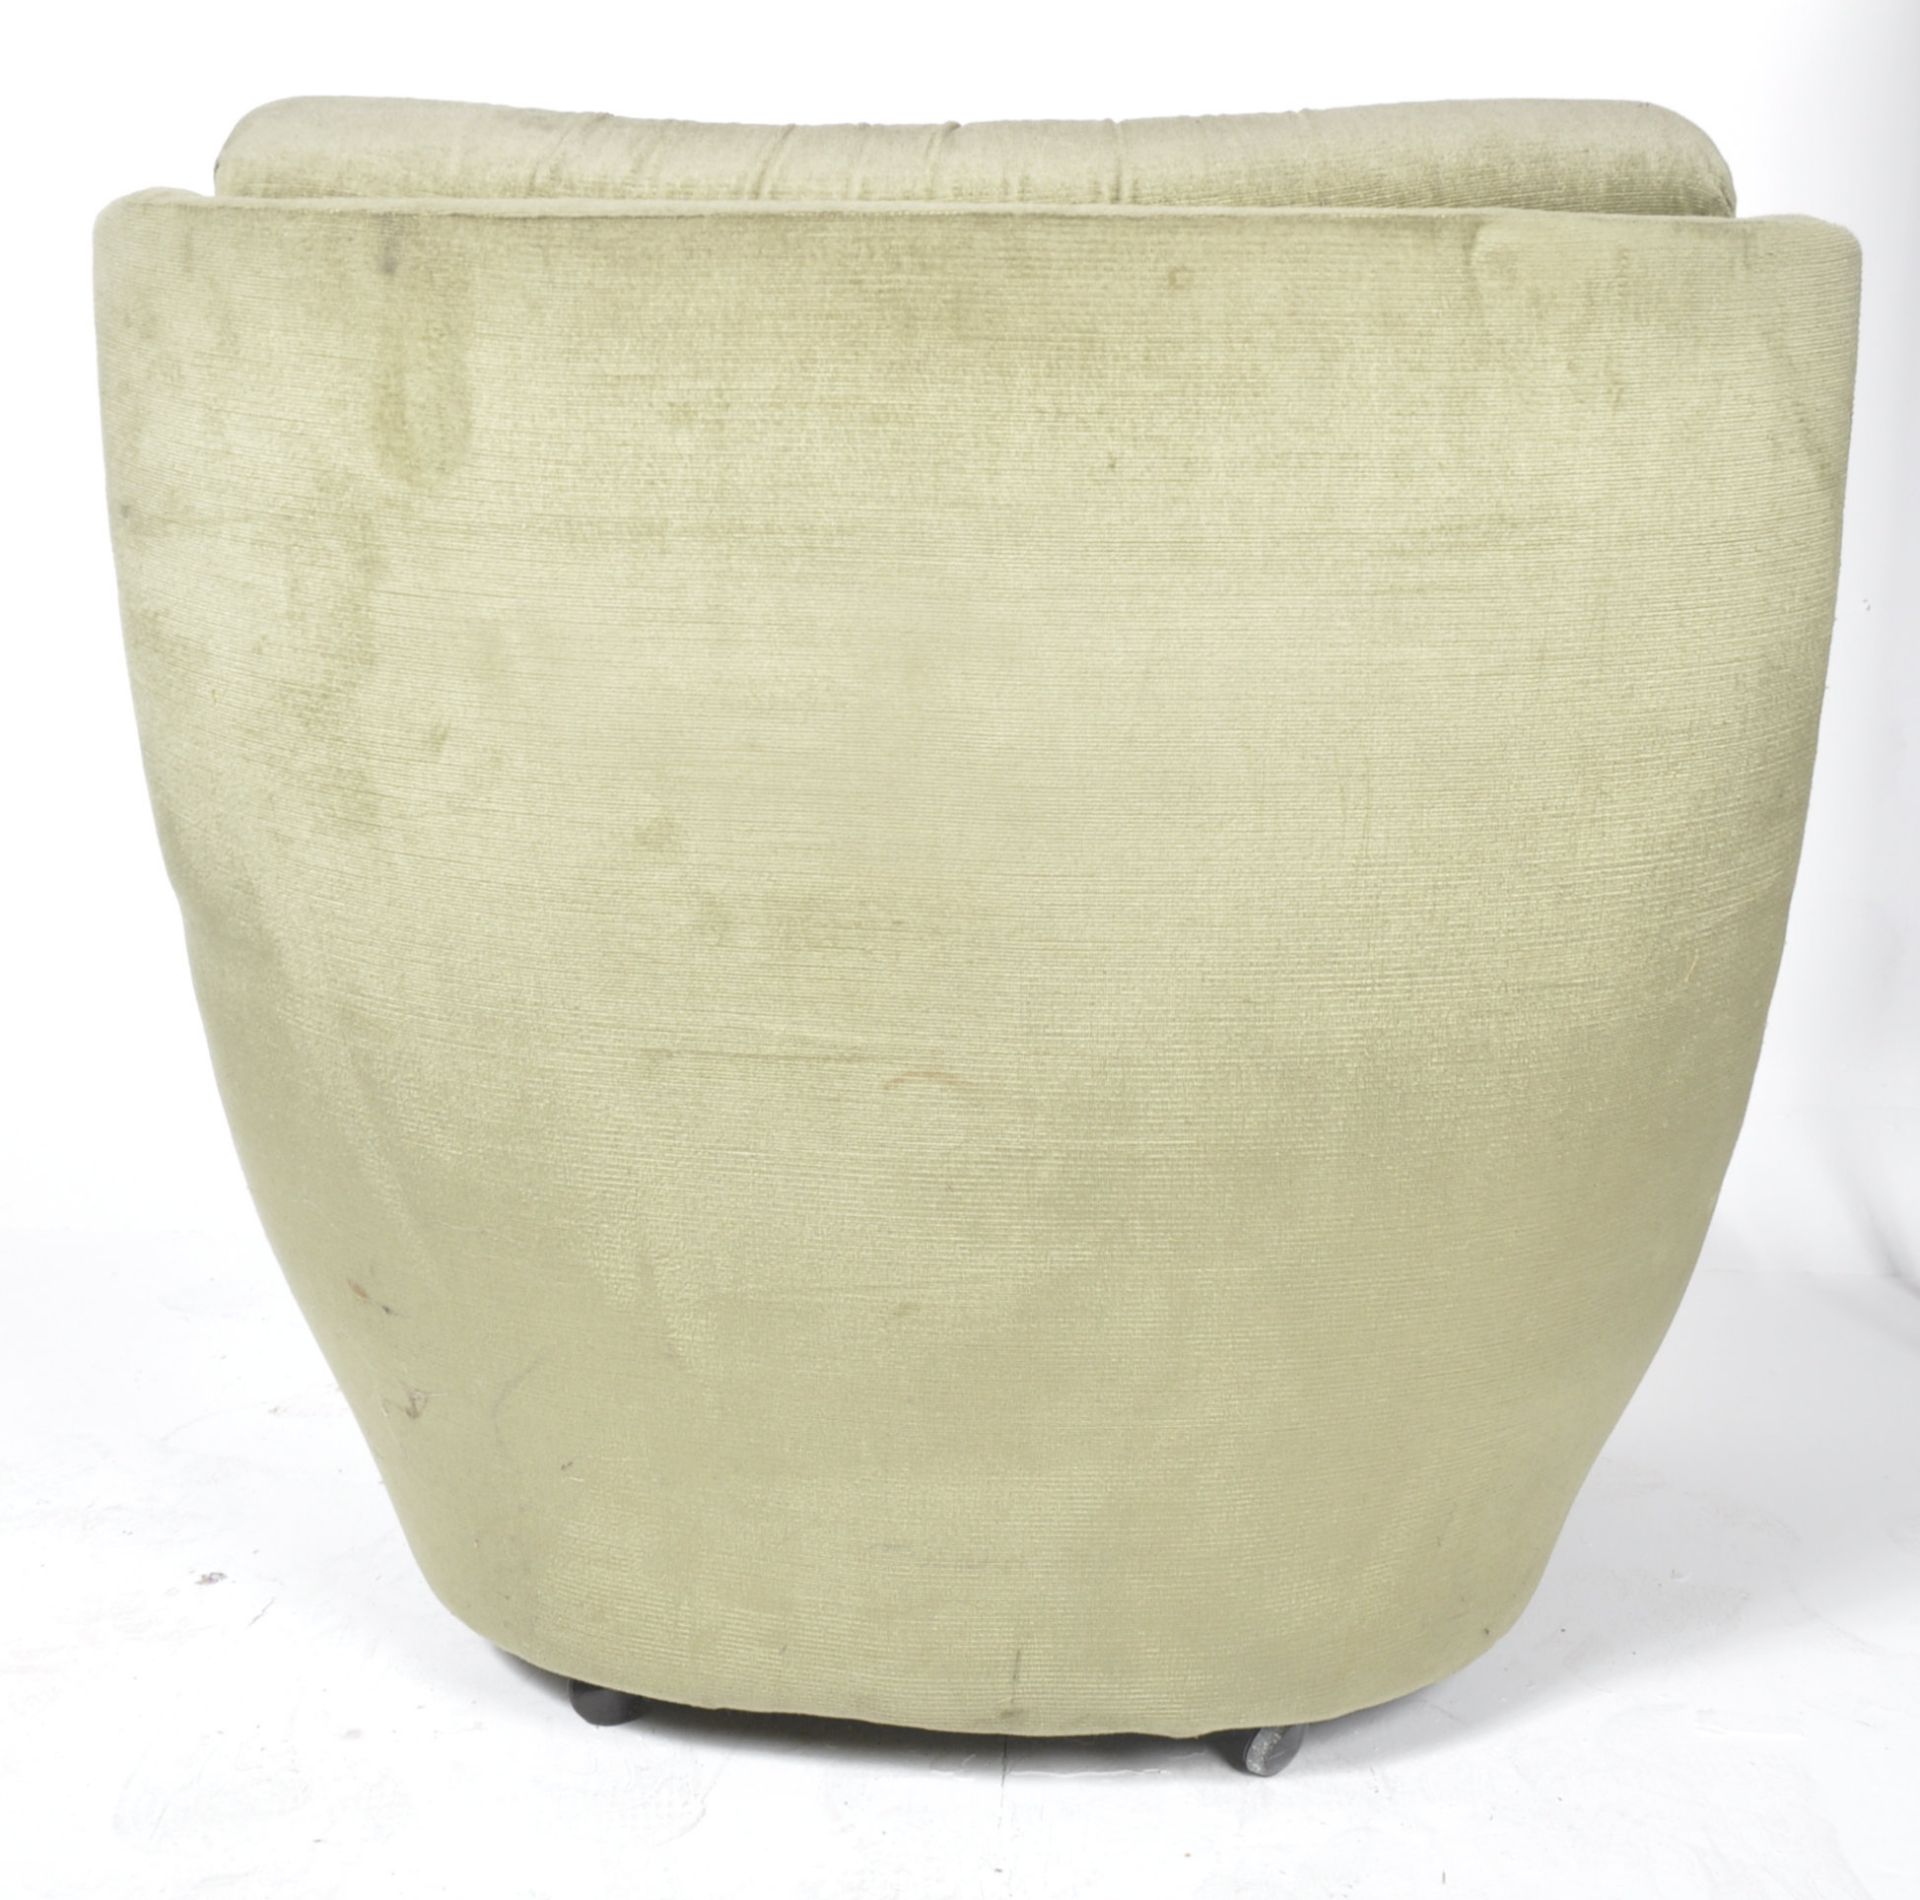 RETRO VINTAGE 1960S EASY LOUNGE EGG CHAIR - Image 6 of 9